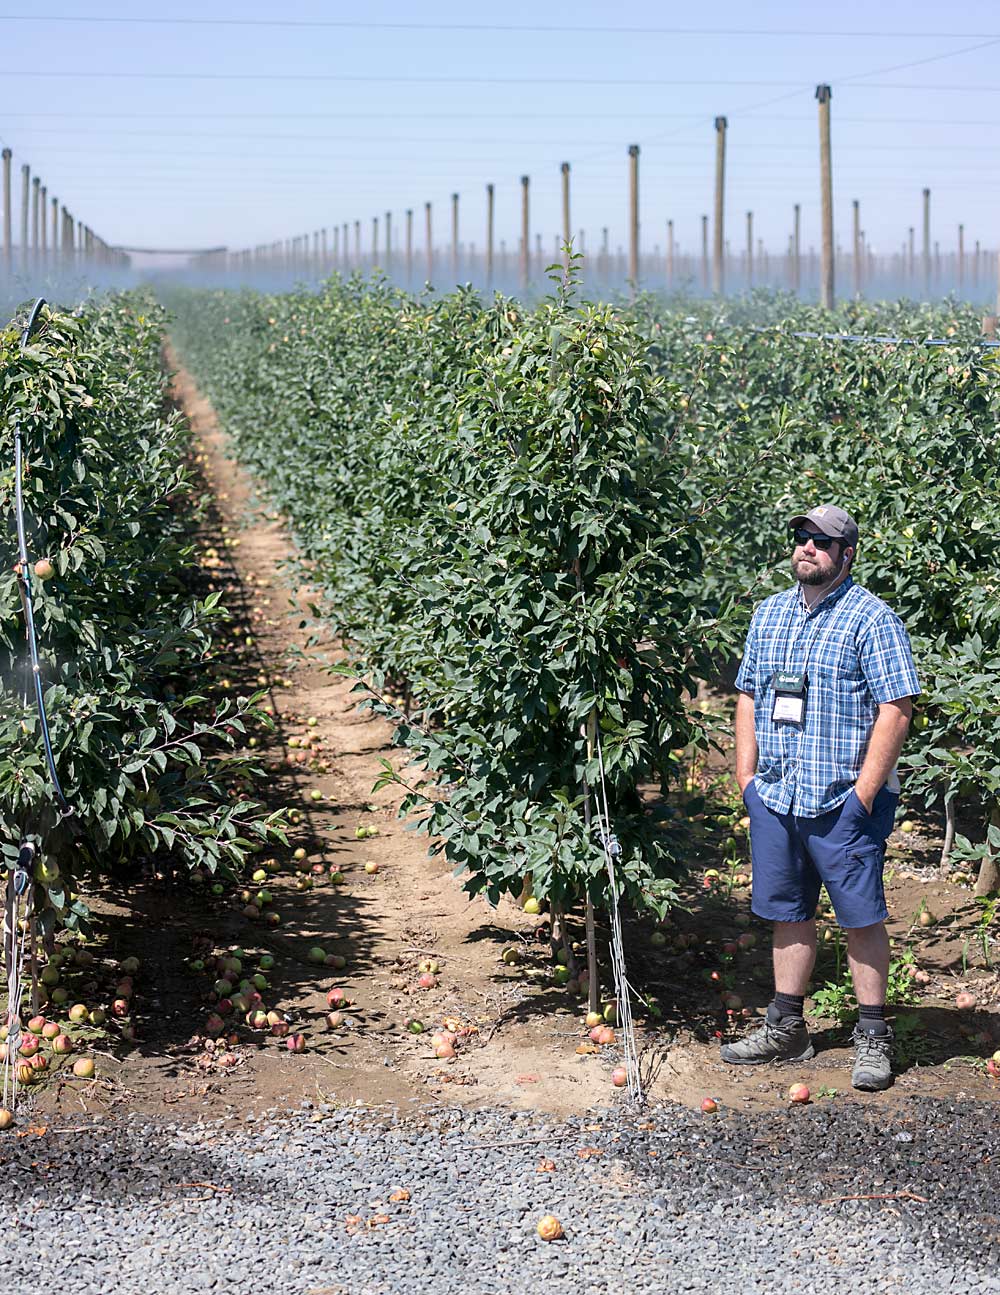 Kade Wallace of Adams County Nursery in Pennsylvania enjoys the mist cooling as he listens to Goldy explain how he designed this 3-foot by 6-foot spaced orchard and planted with 7-foot-tall trees, already touching the top wire. The tall posts in the background provide cross-support and could eventually support shade netting. (TJ Mullinax/Good Fruit Grower)